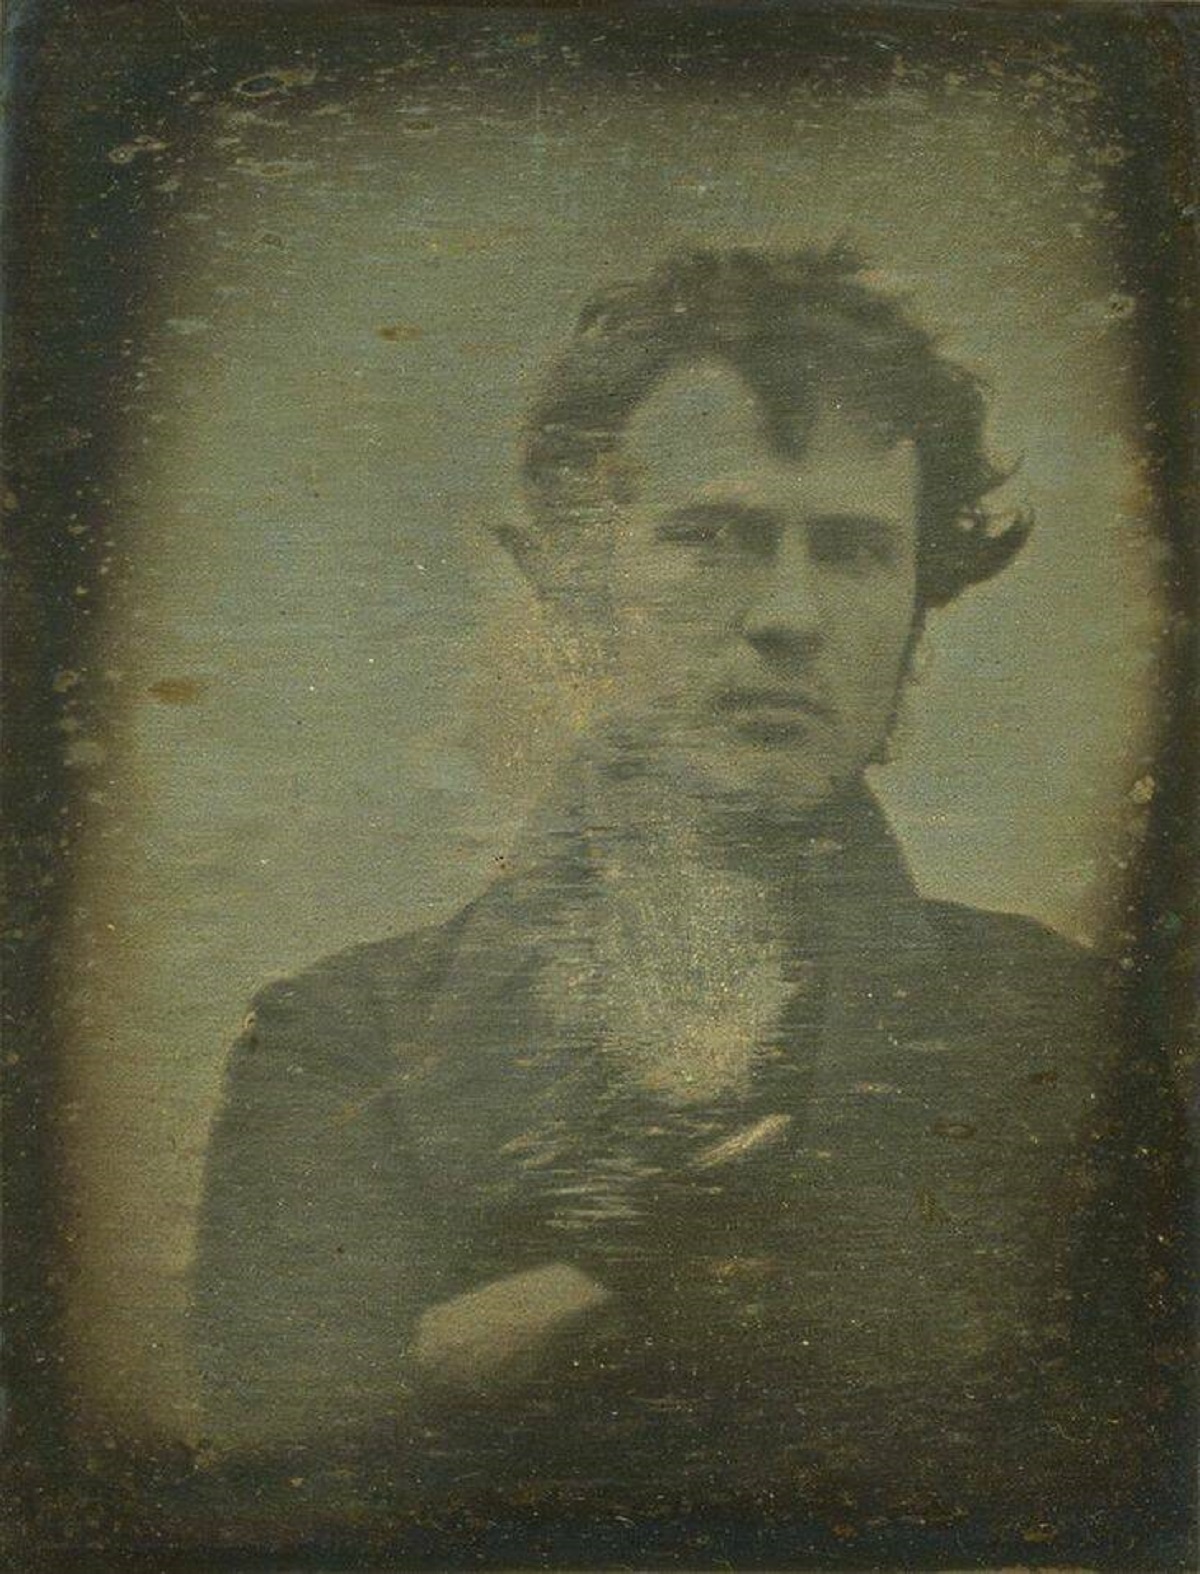 "Millennials didn’t invent the selfie game. The world’s first selfie was snapped way back in 1839 by a guy named Robert Cornelius. He beat us all to the selfie trend!"